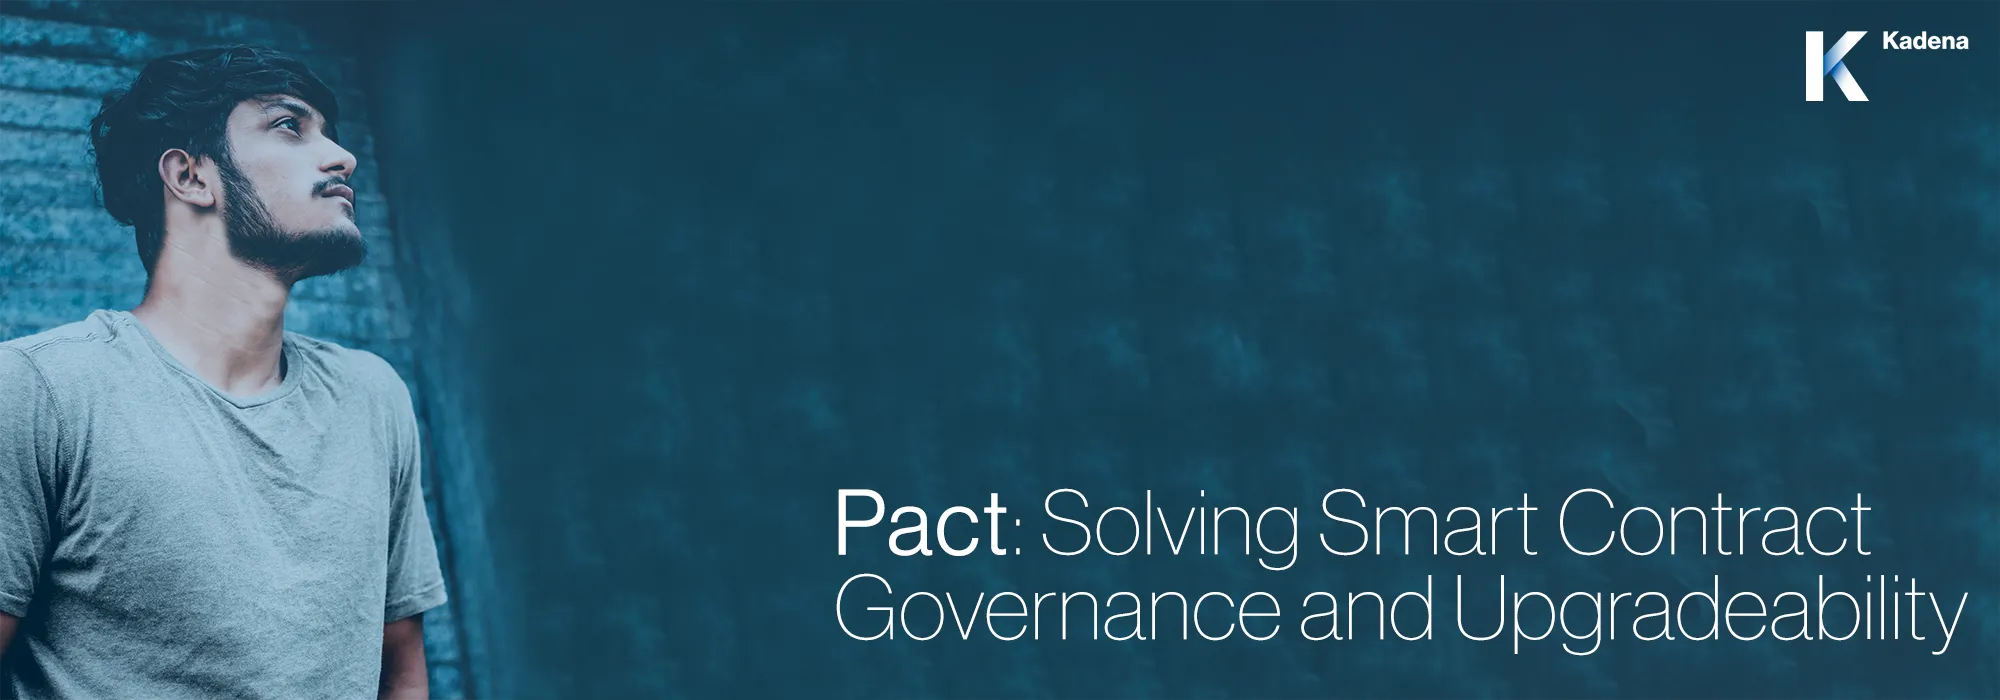 Pact - Solving Smart Contract Governance and Upgradeability